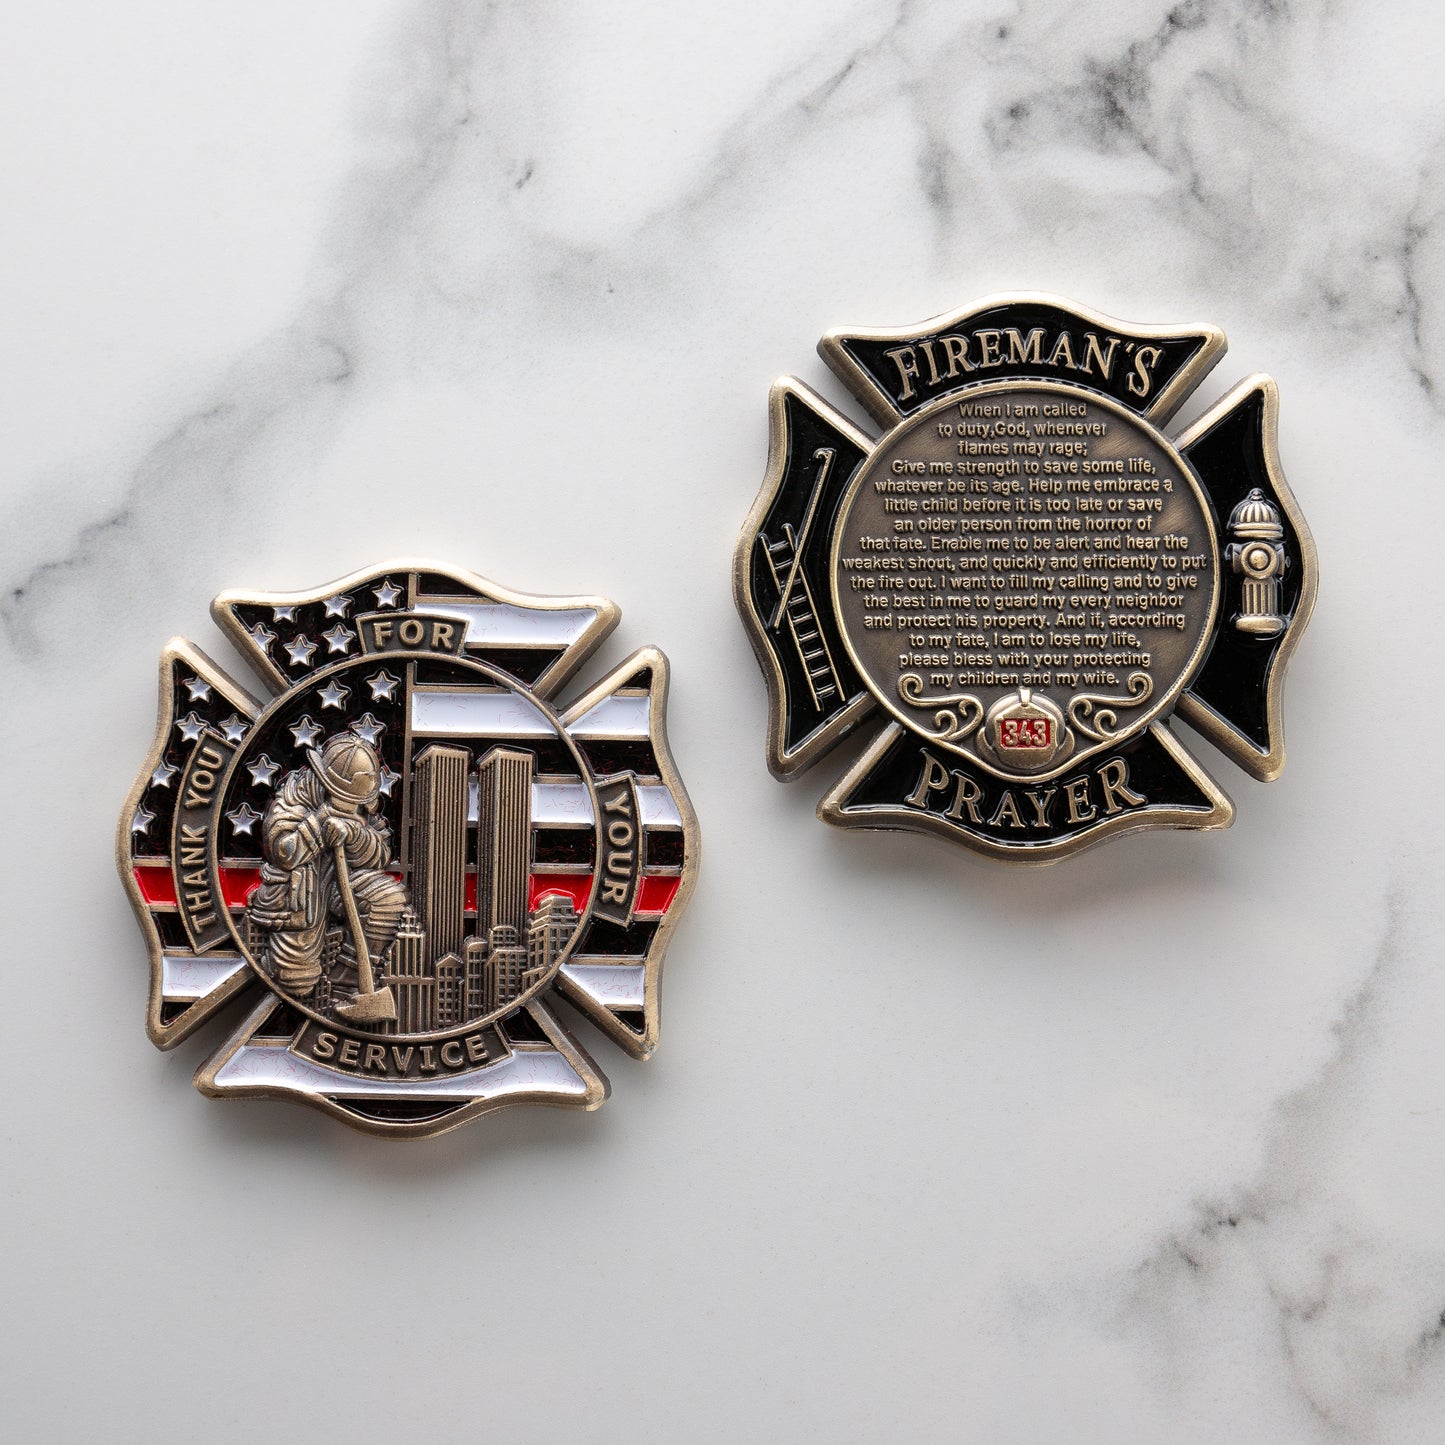 9/11 Firefighter - Thank You For Your Service Coin